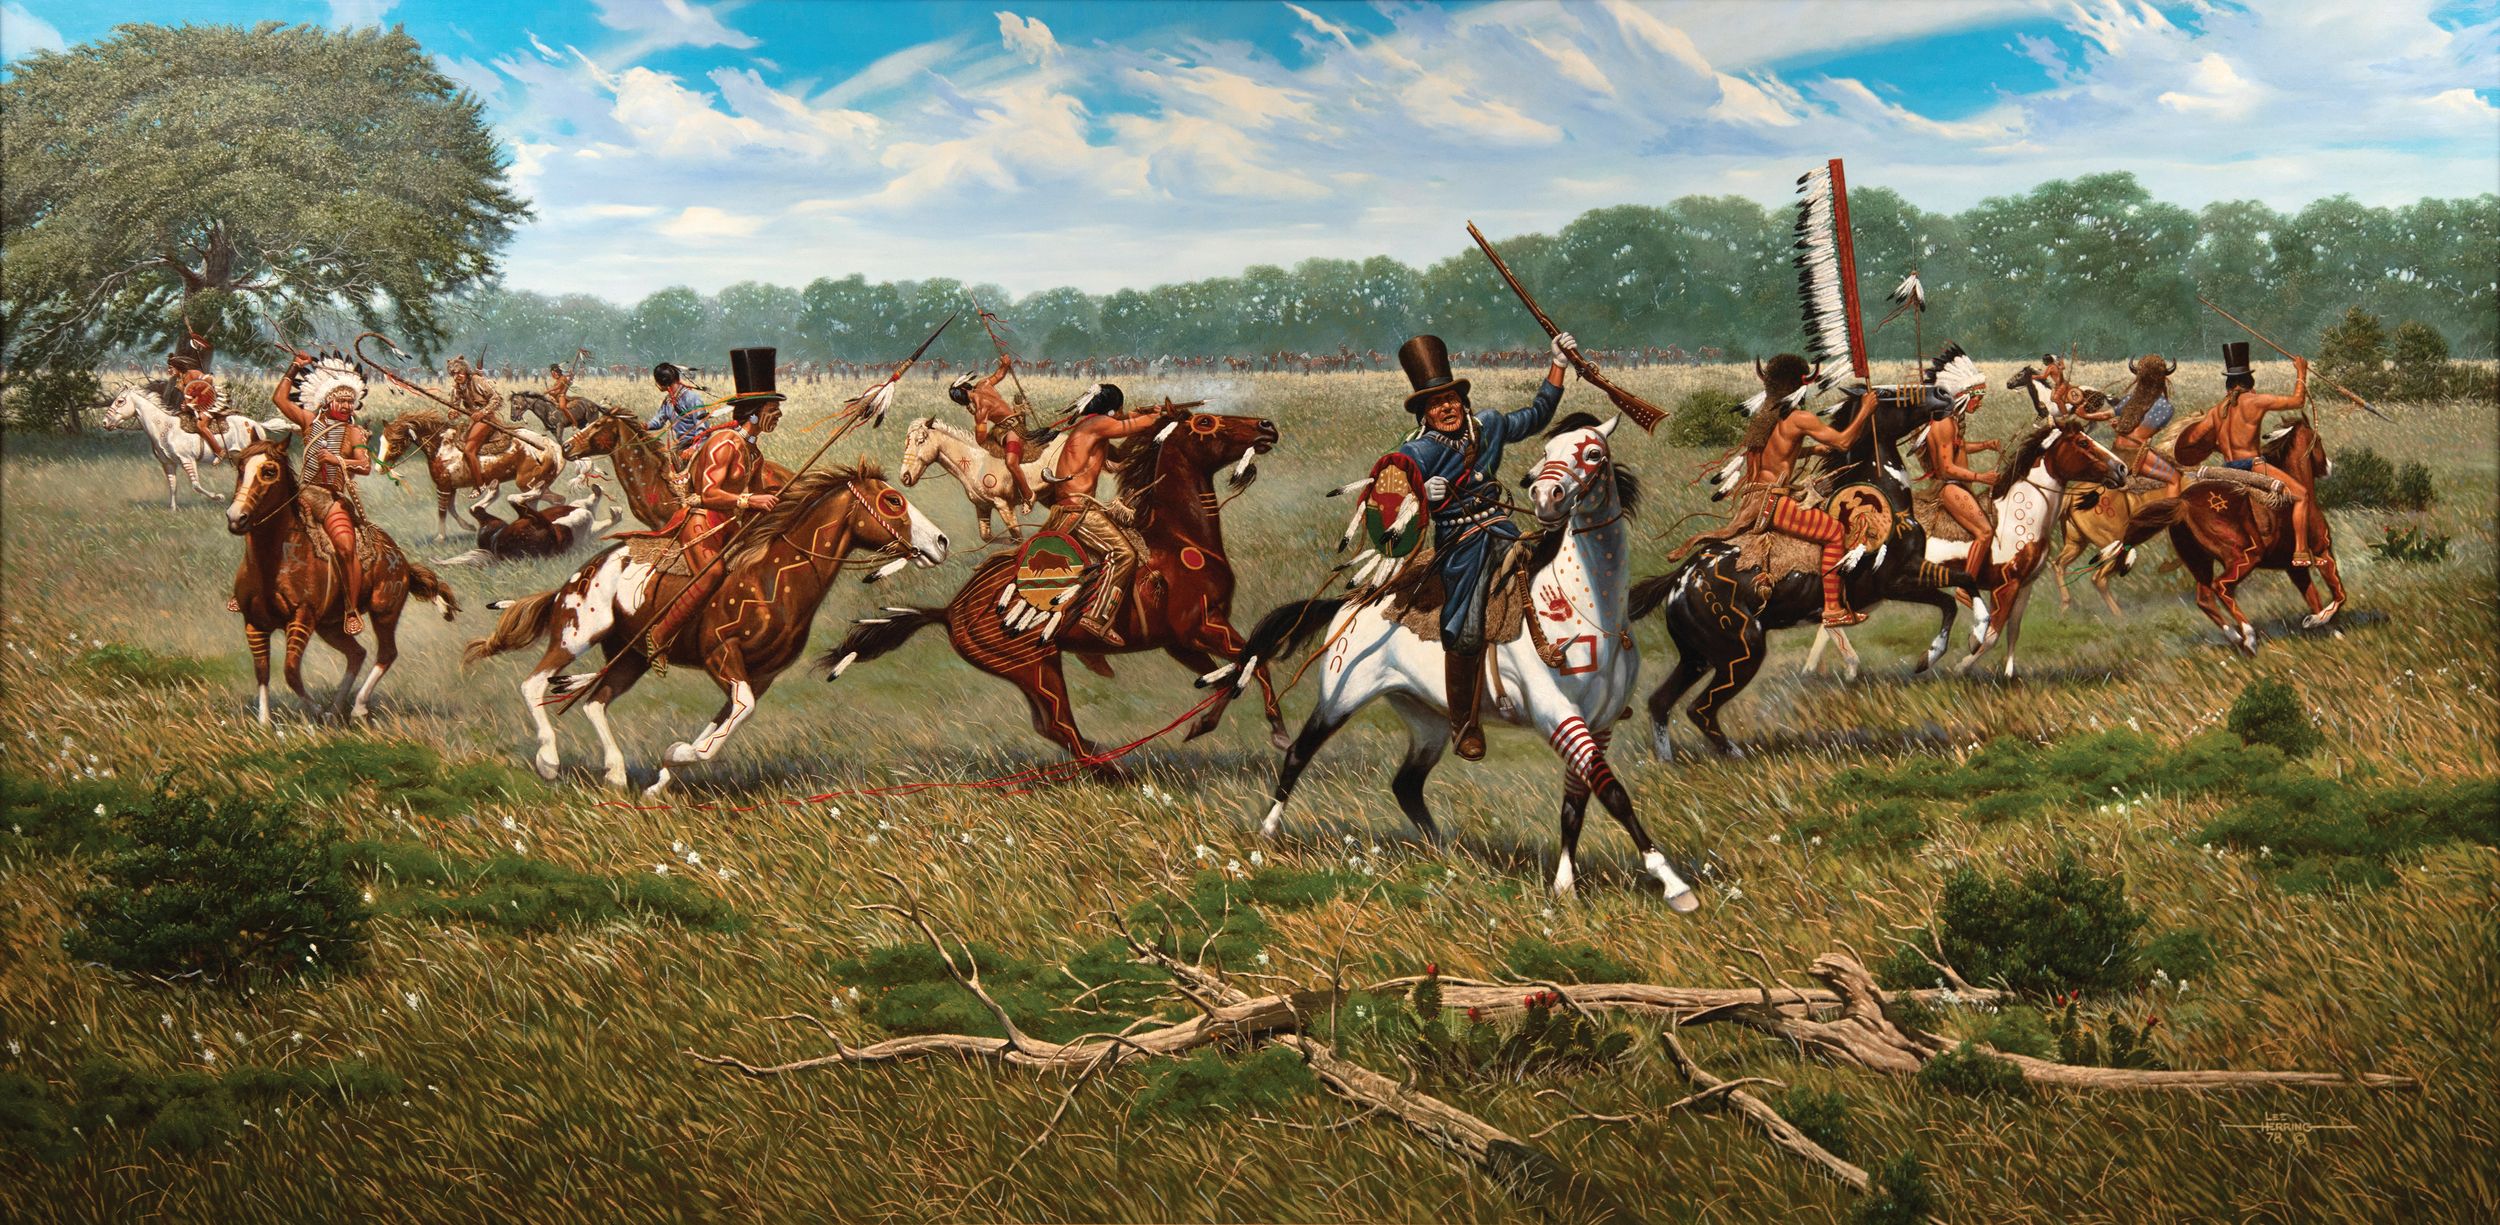 Chief Buffalo Hump, wearing a stolen top hat, rides a white horse during the battle of Plum Creek in this painting by Lee Herring. The pursuing Texas Rangers and militia are visible in the distance.